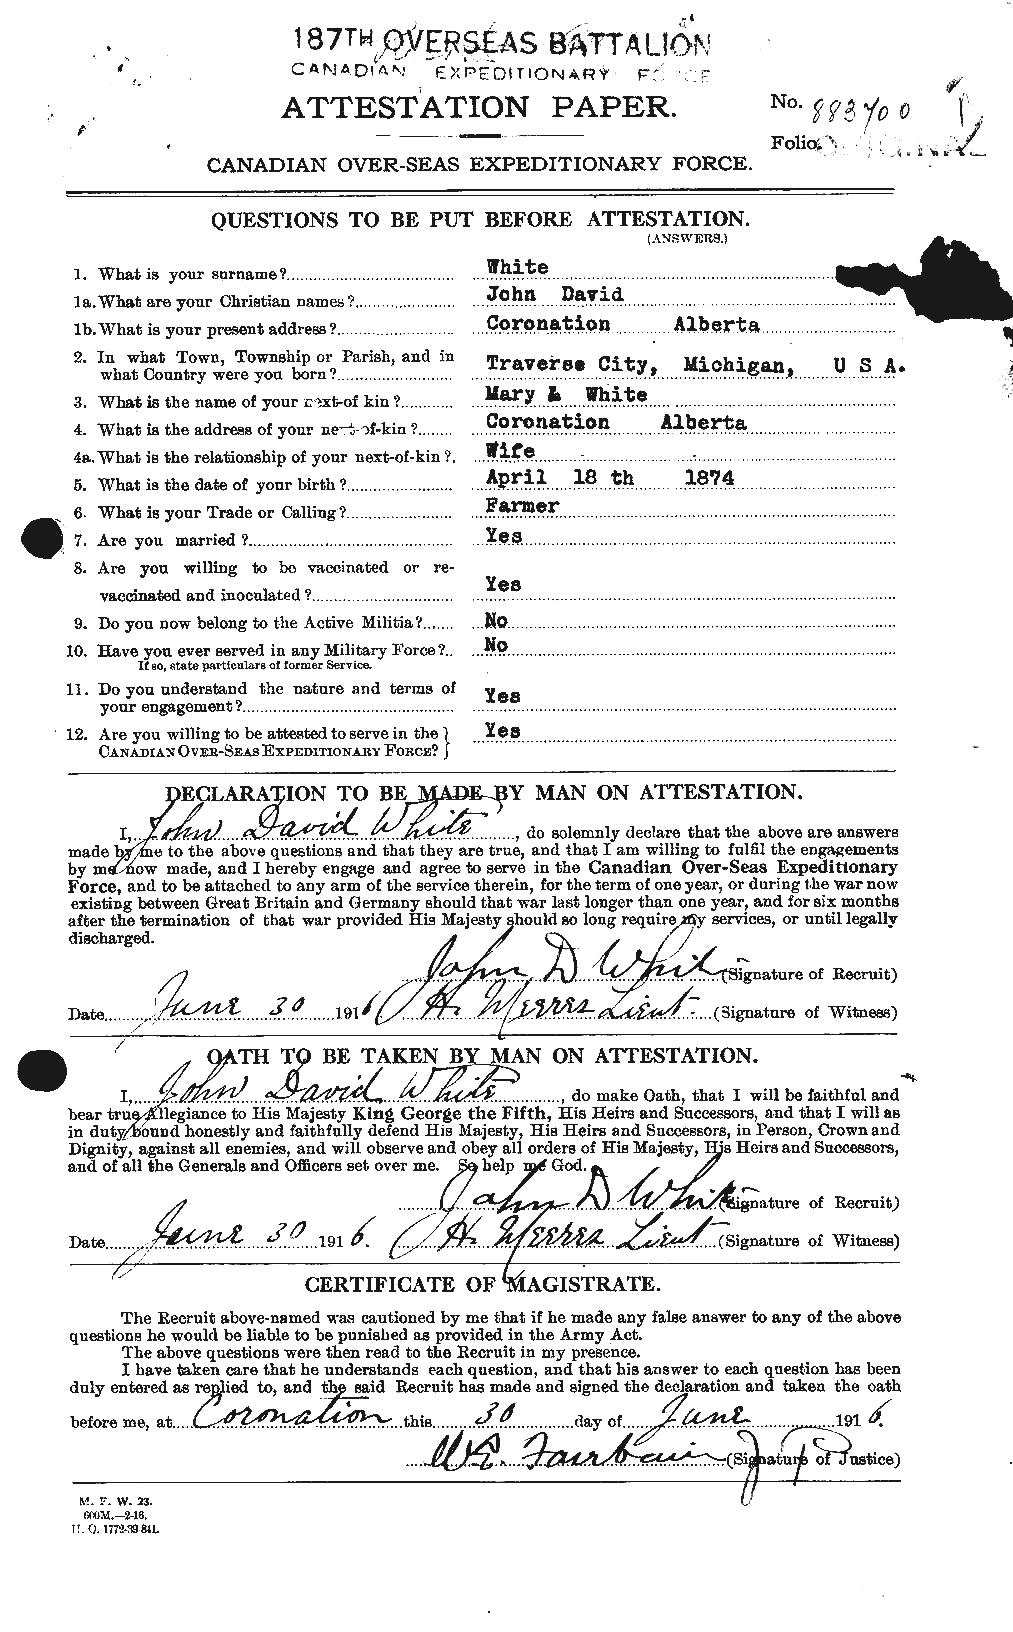 Personnel Records of the First World War - CEF 671550a